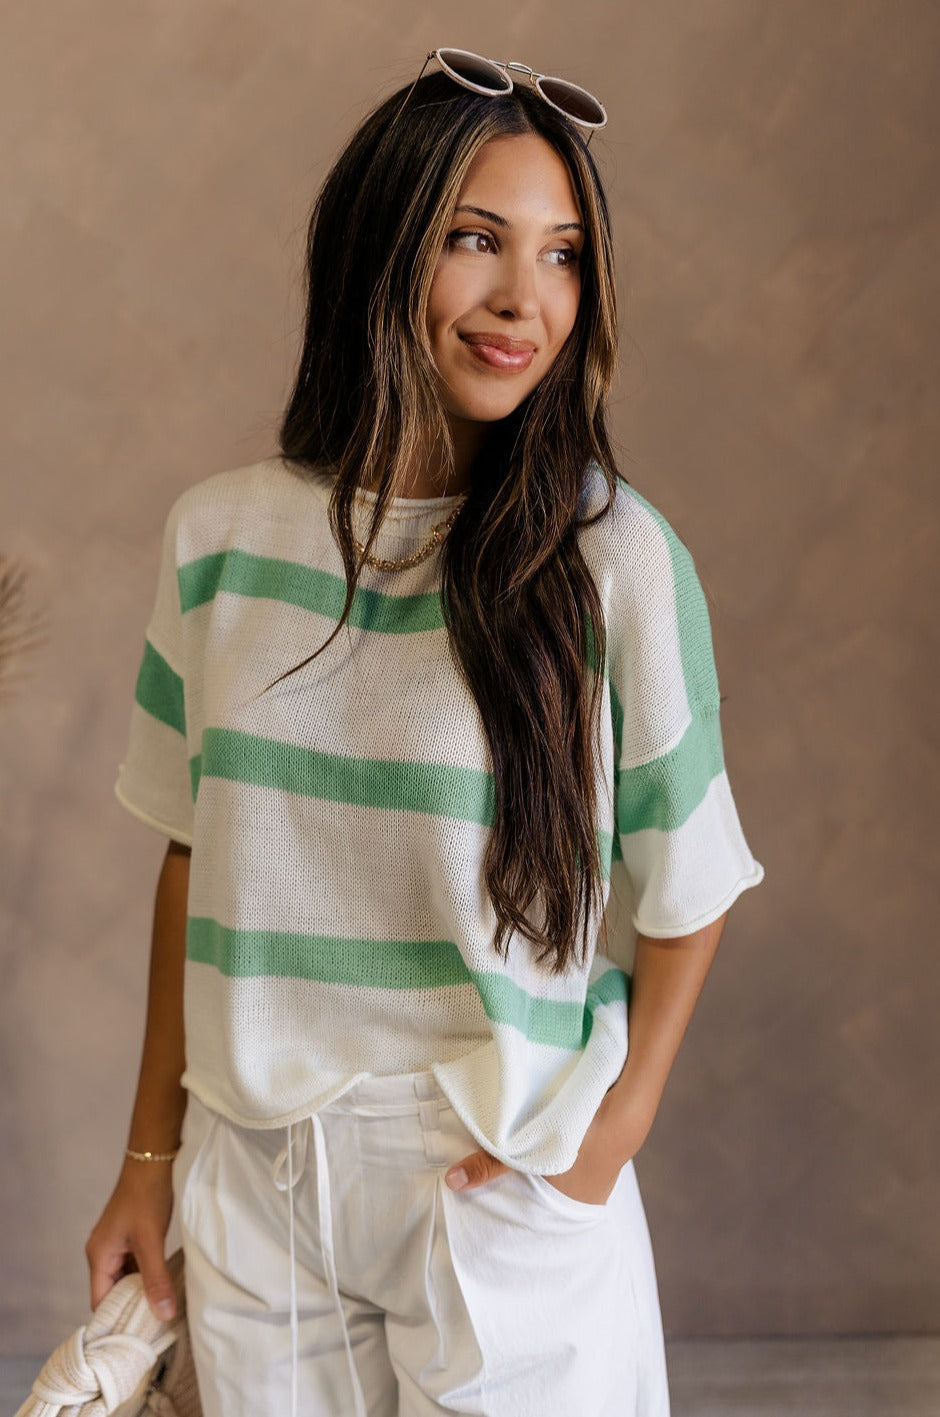 Front view of female model wearing the Camila Green & White Stripe Short Sleeve Top which features Light Green and White Knit Fabric, Stripe Pattern, Round Neckline and Short Sleeves.